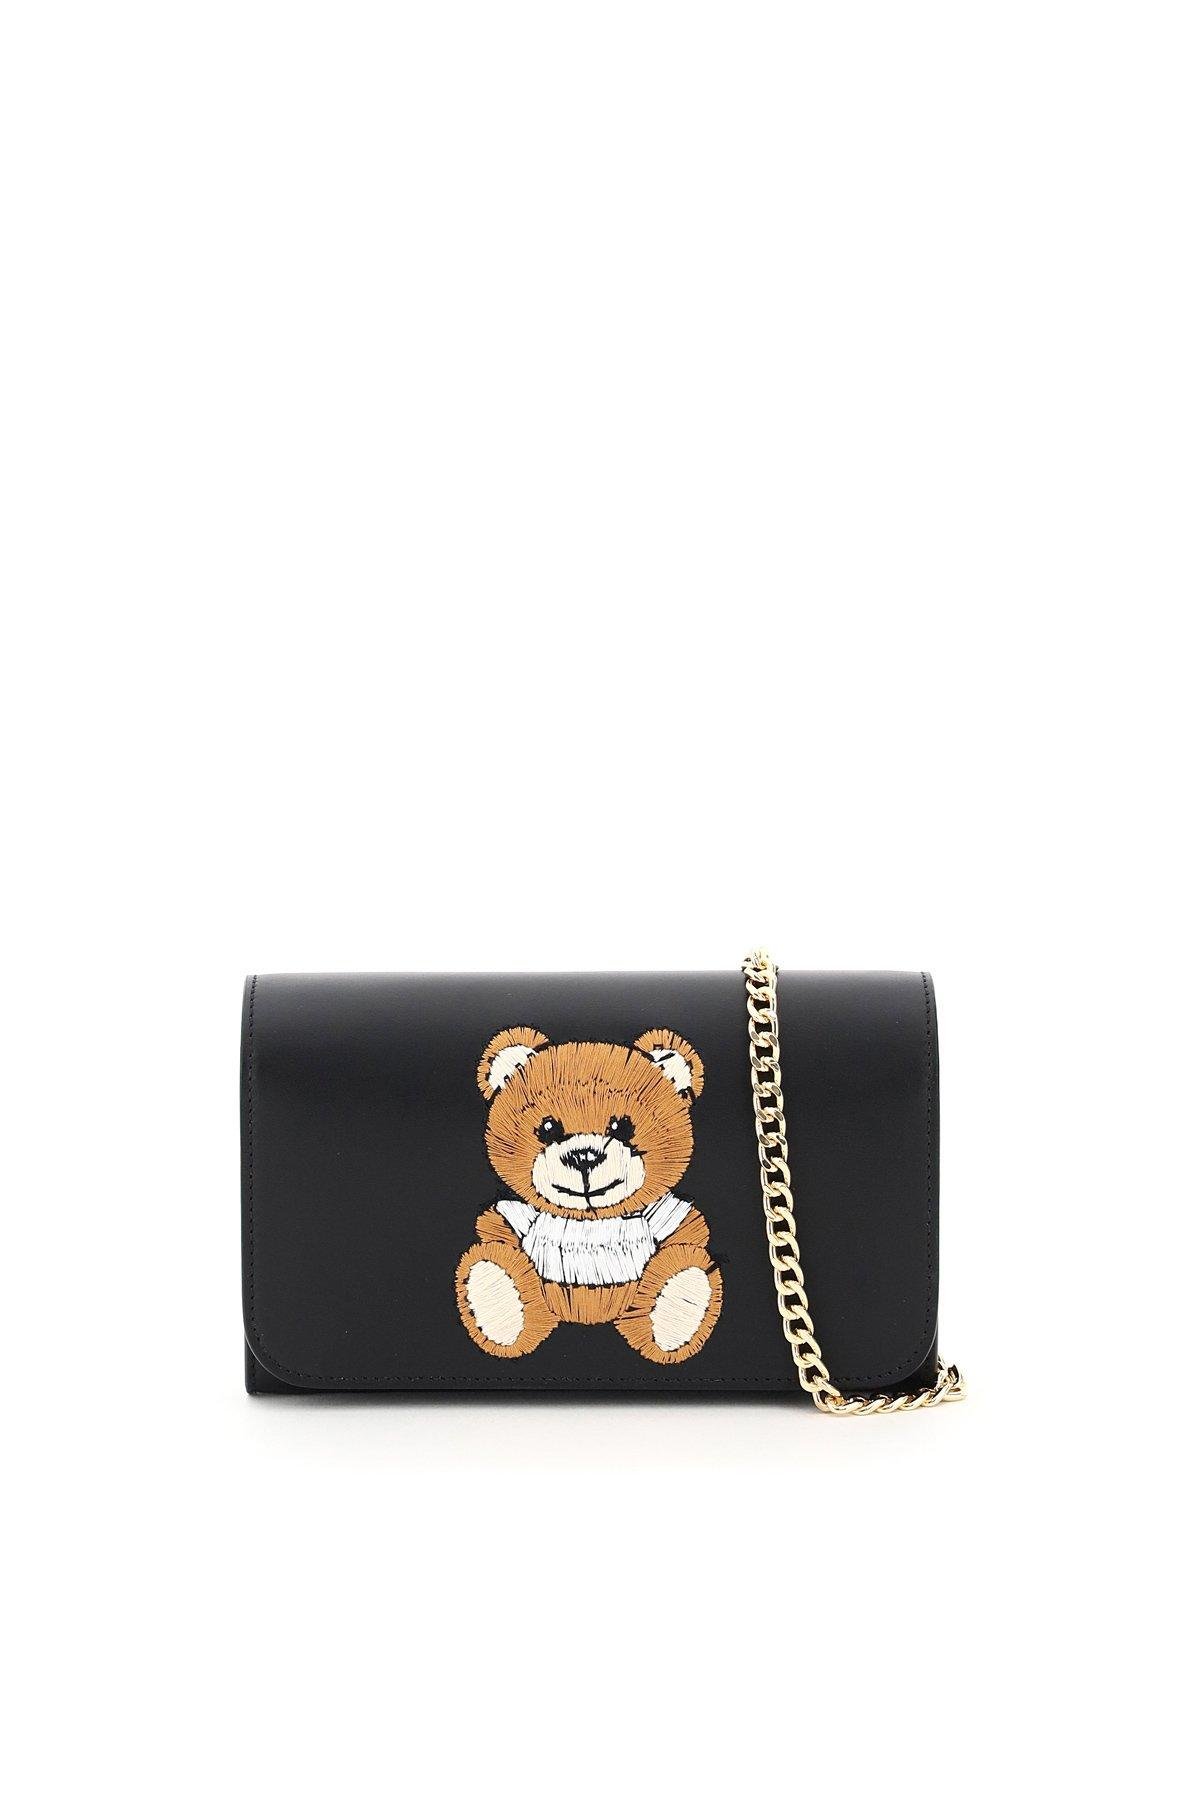 Moschino Mini Bag Chain Teddy Bear Embroidery Os Leather in Black | Lyst